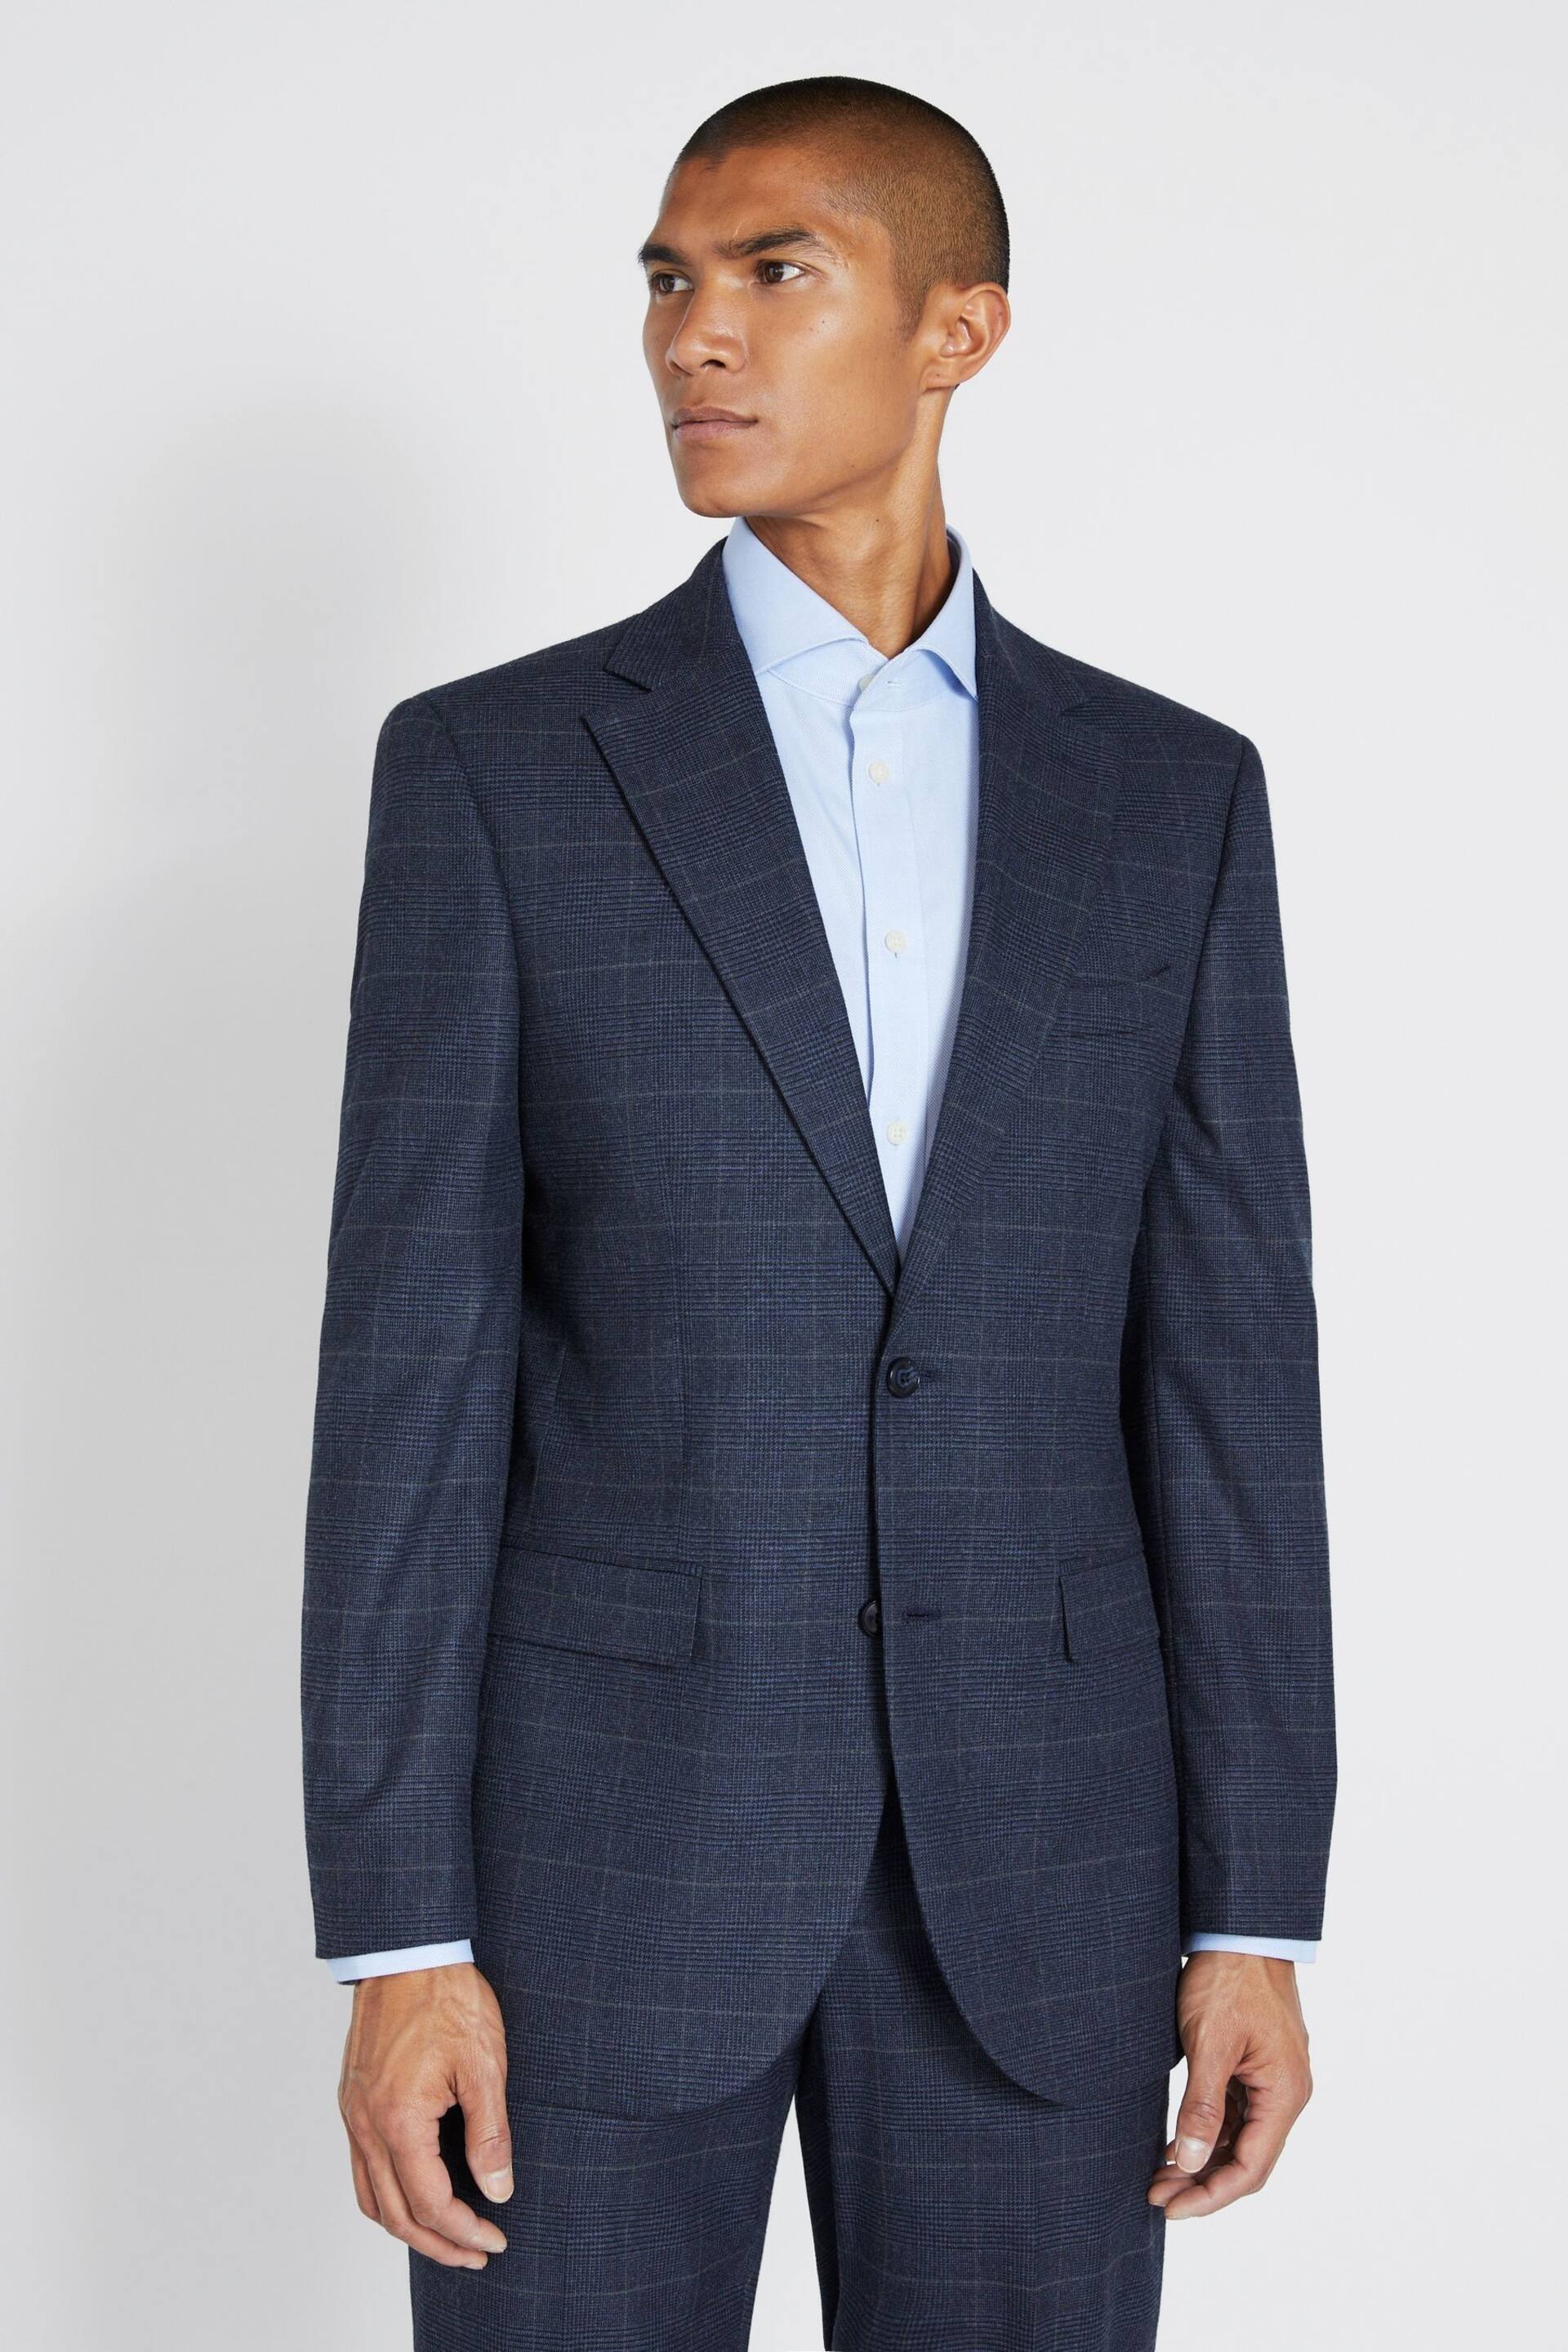 MOSS Regular Fit Blue With Khaki Check Suit: Jacket - Image 1 of 5